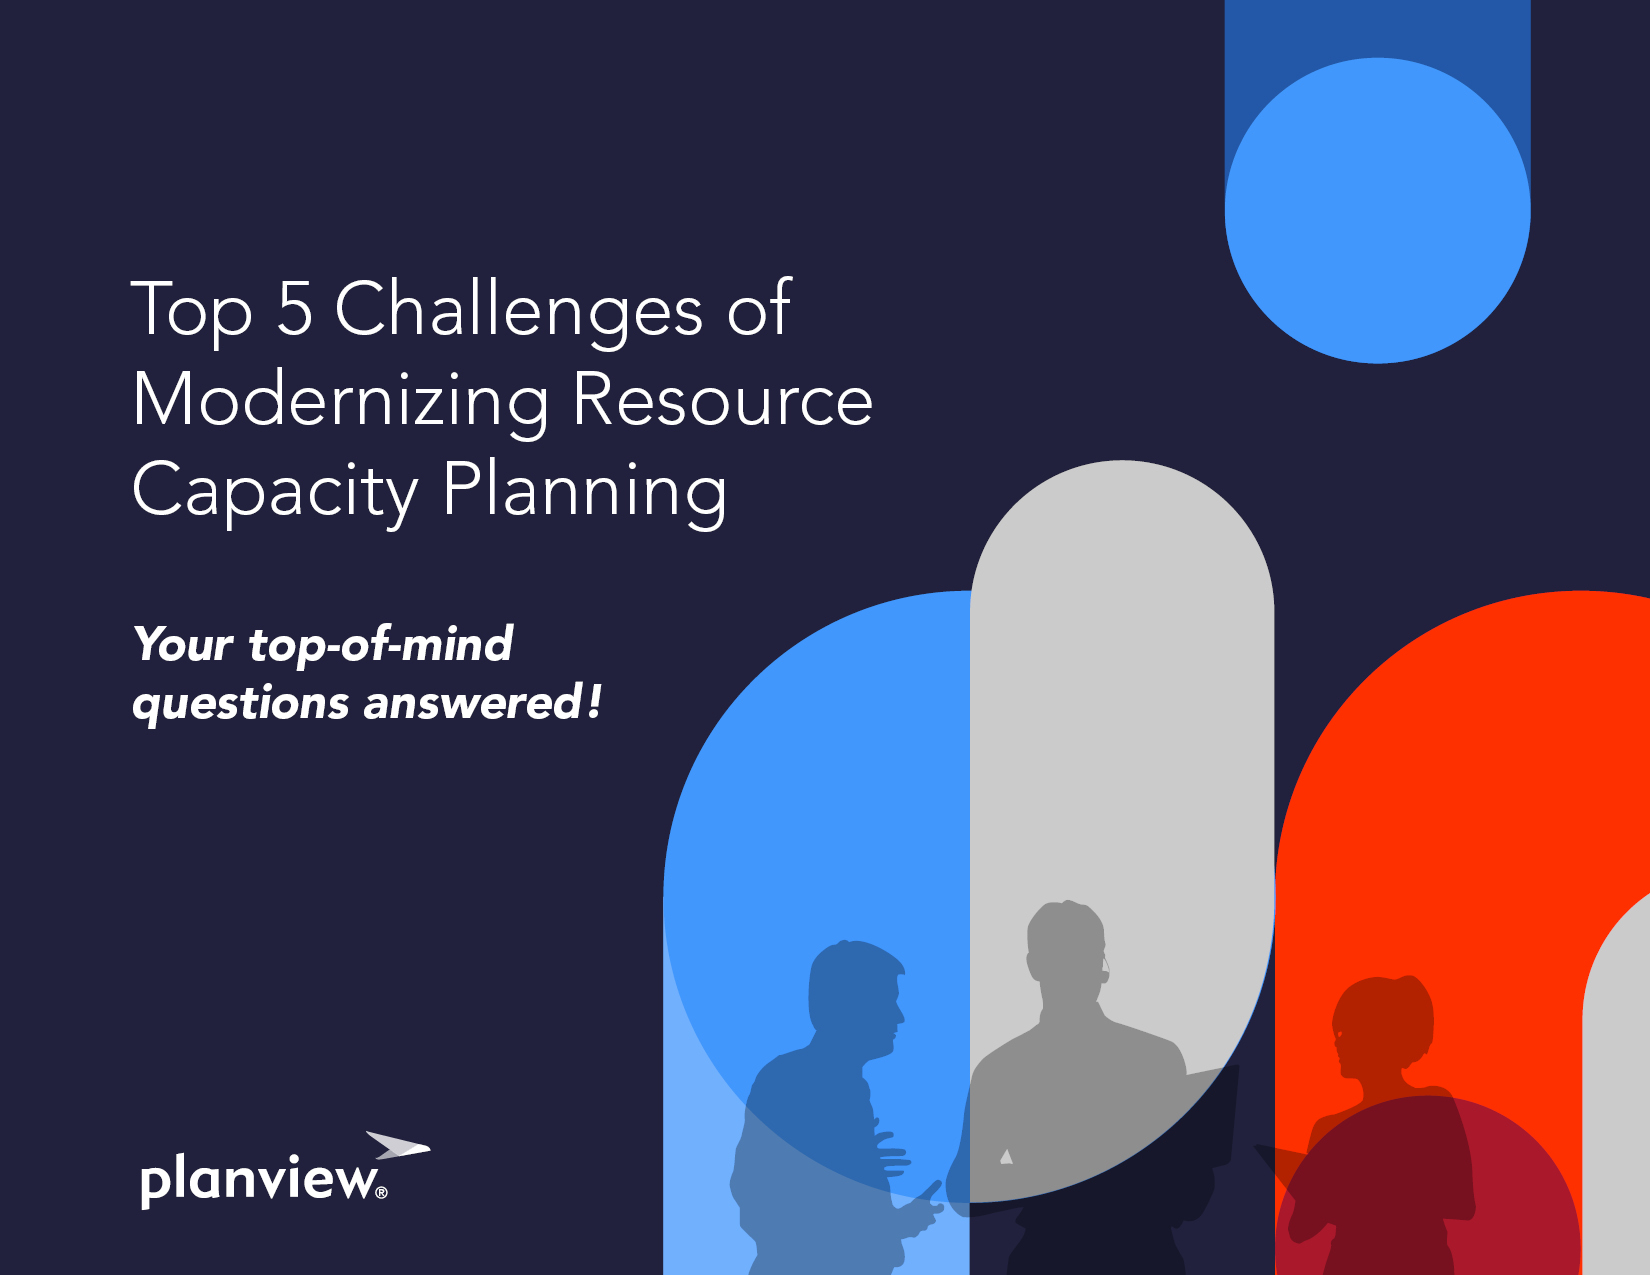 Top 5 Challenges of Modernizing Resource Capacity Planning